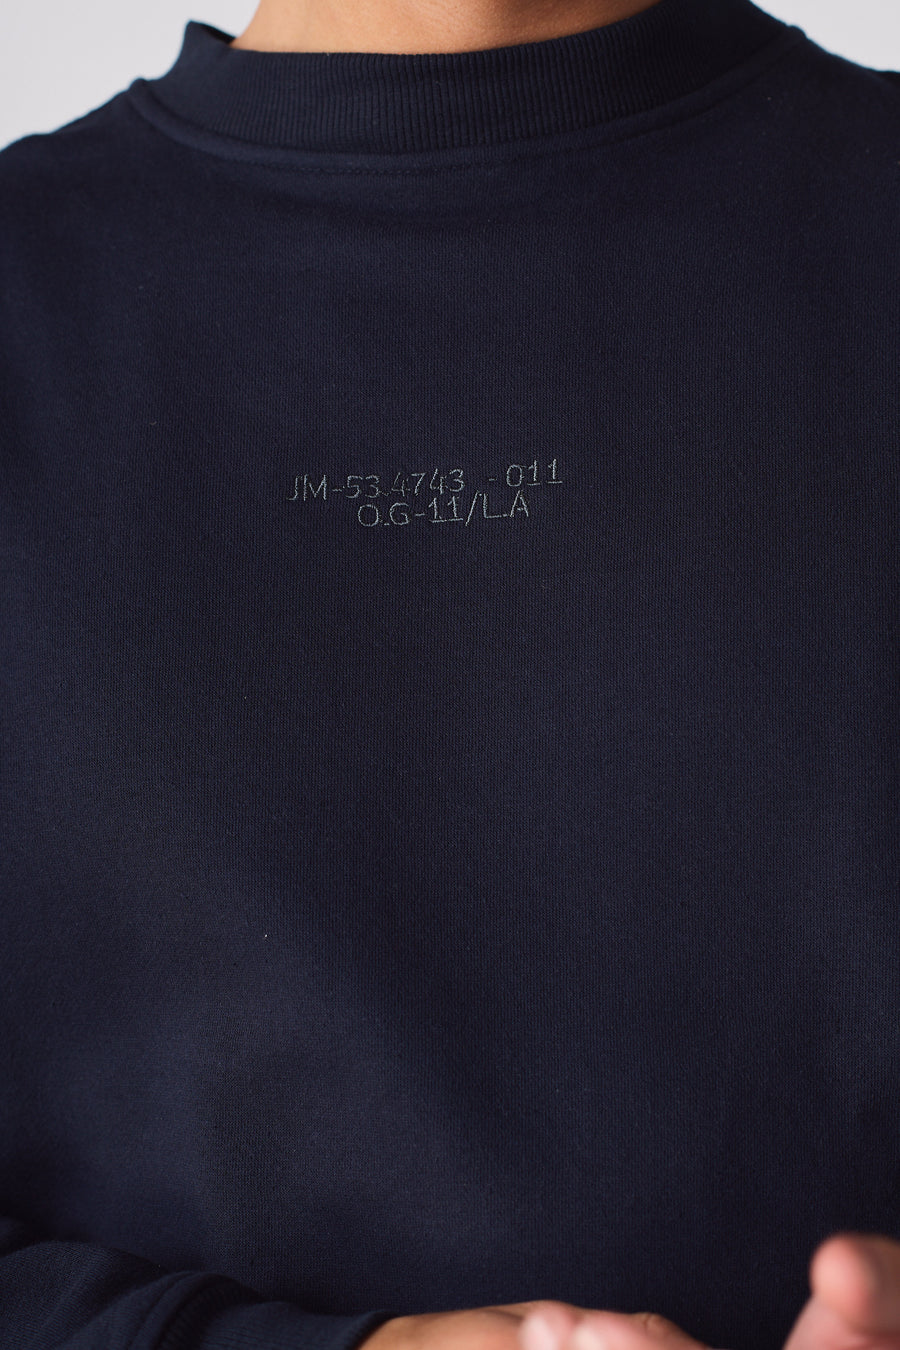 EMBROIDERY DETAIL TRACKSUIT SWEATSHIRT - NAVY BLUE